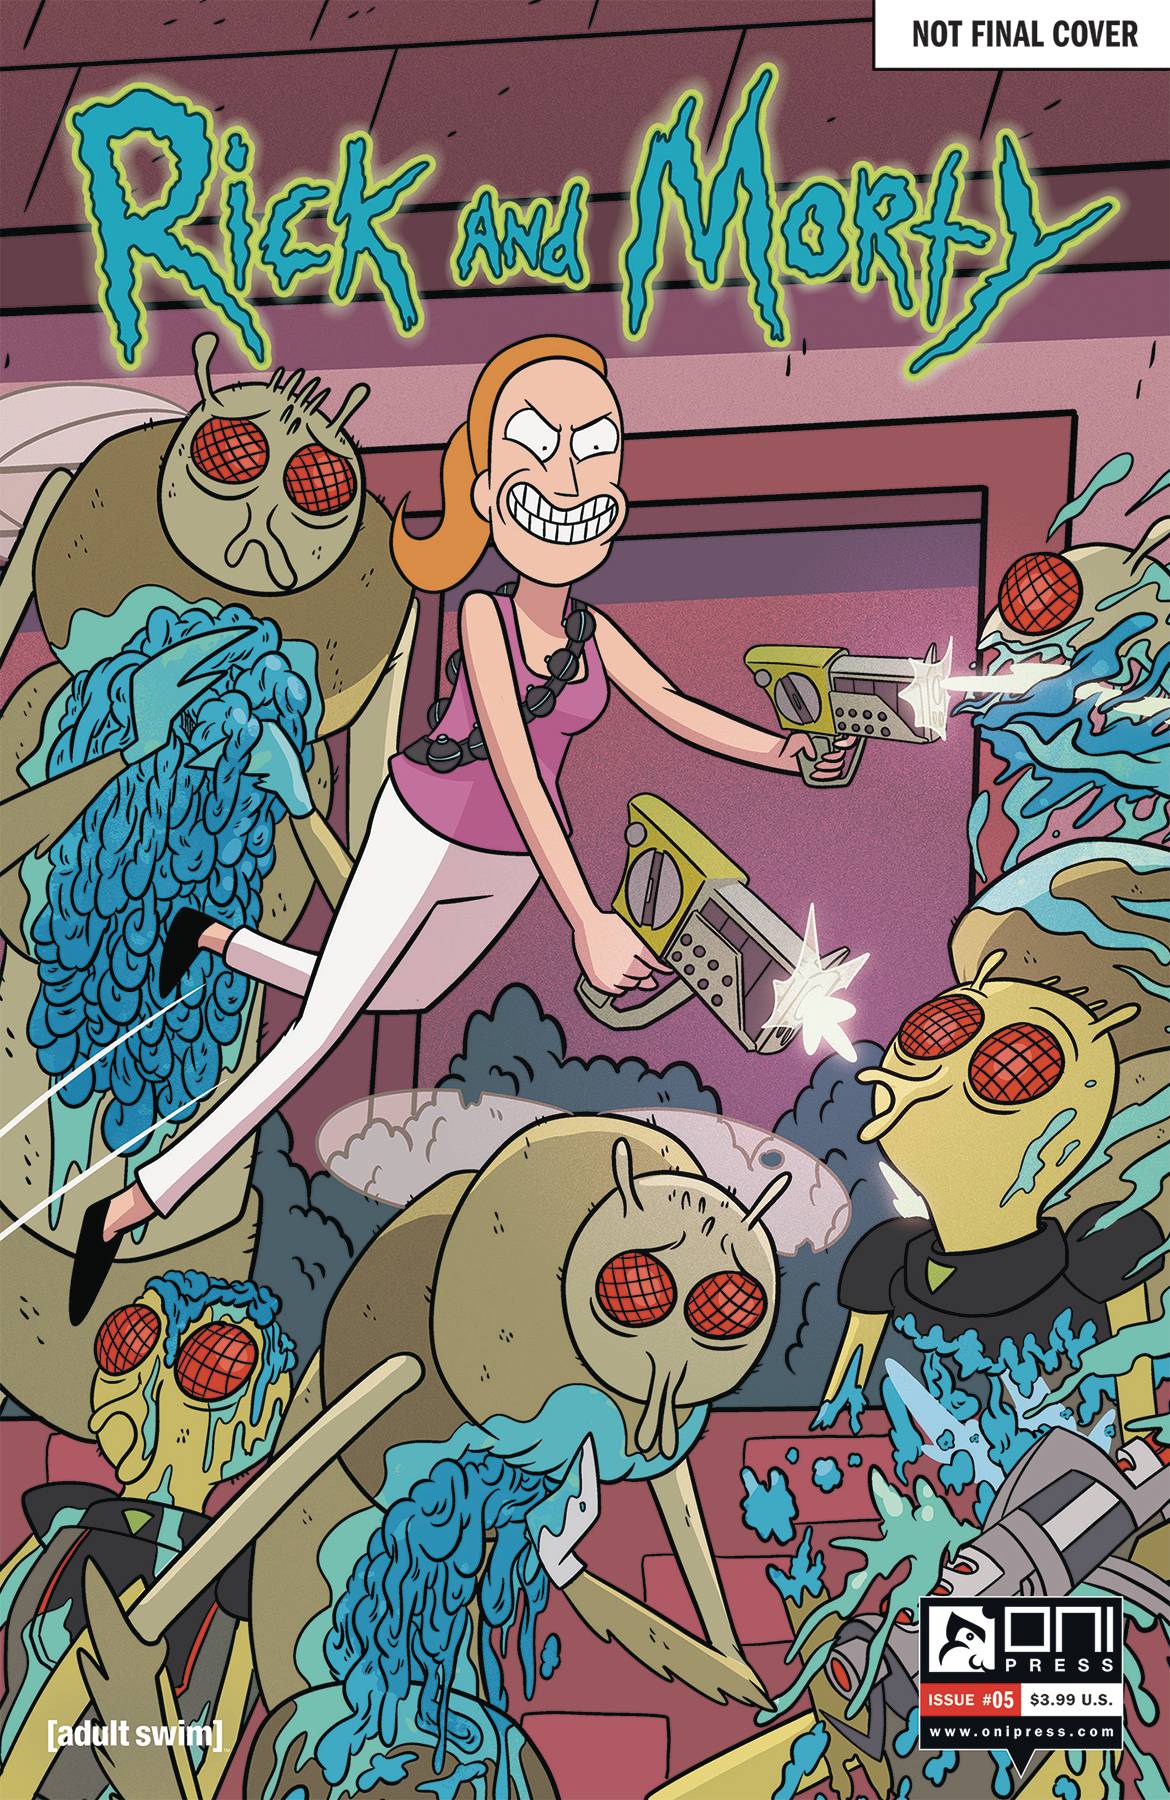 Rick and Morty #5 50 Issues Special Variant (2015)